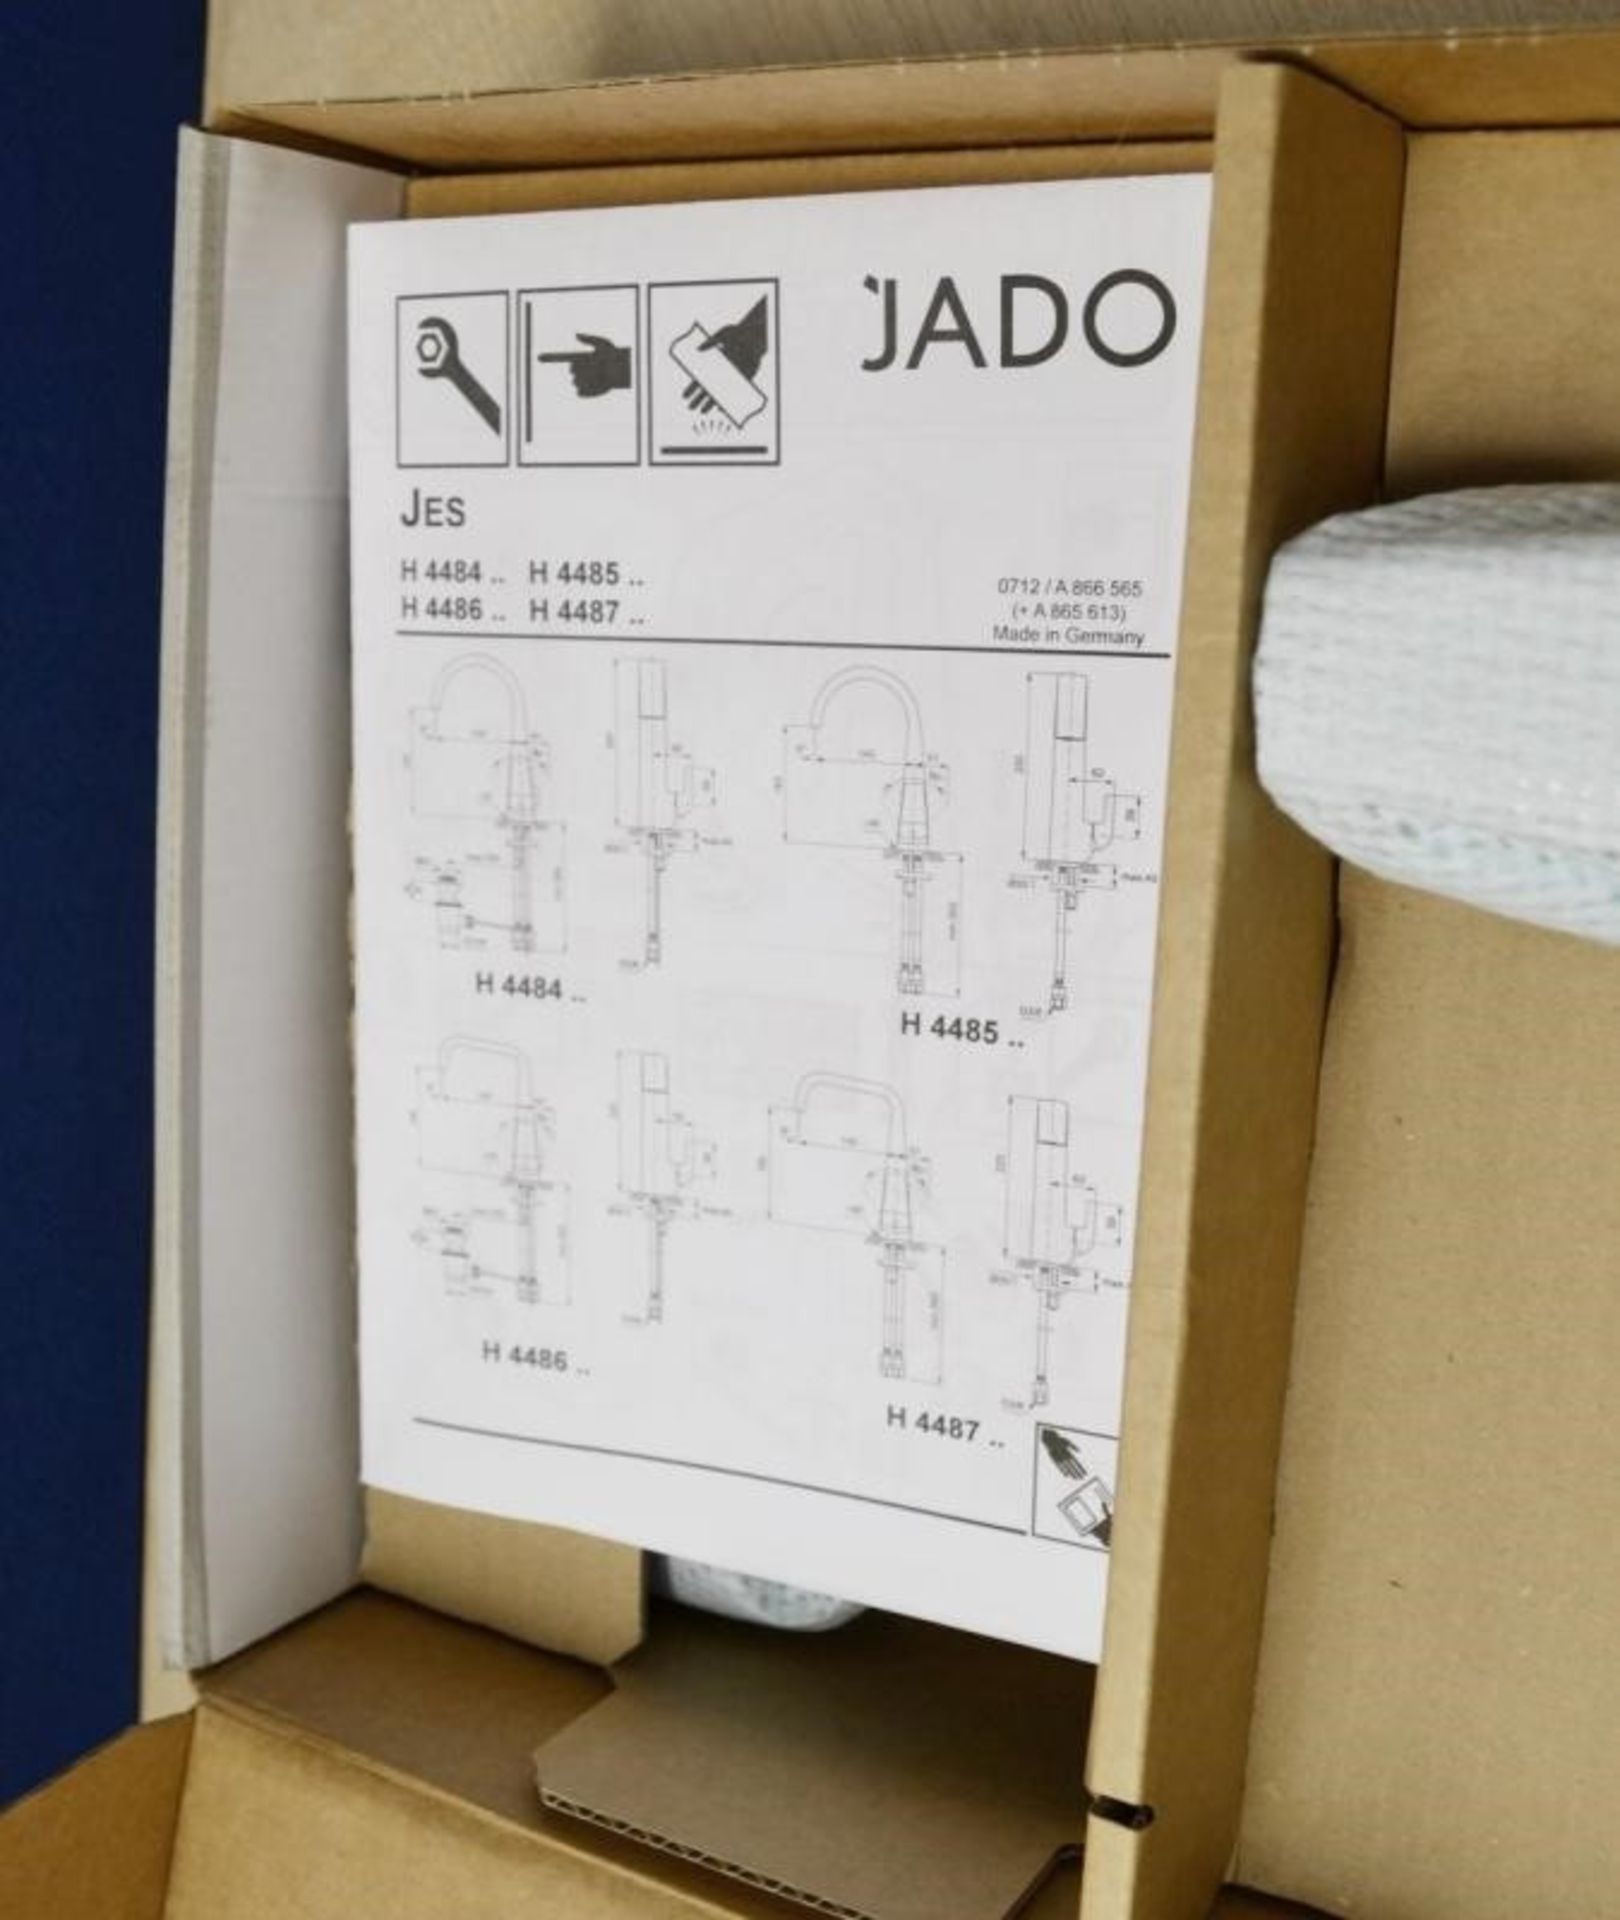 1 x Ideal Standard JADO "Jes" Single Lever Basin Mixer Without Waste Set (H4485AA) - Image 7 of 7